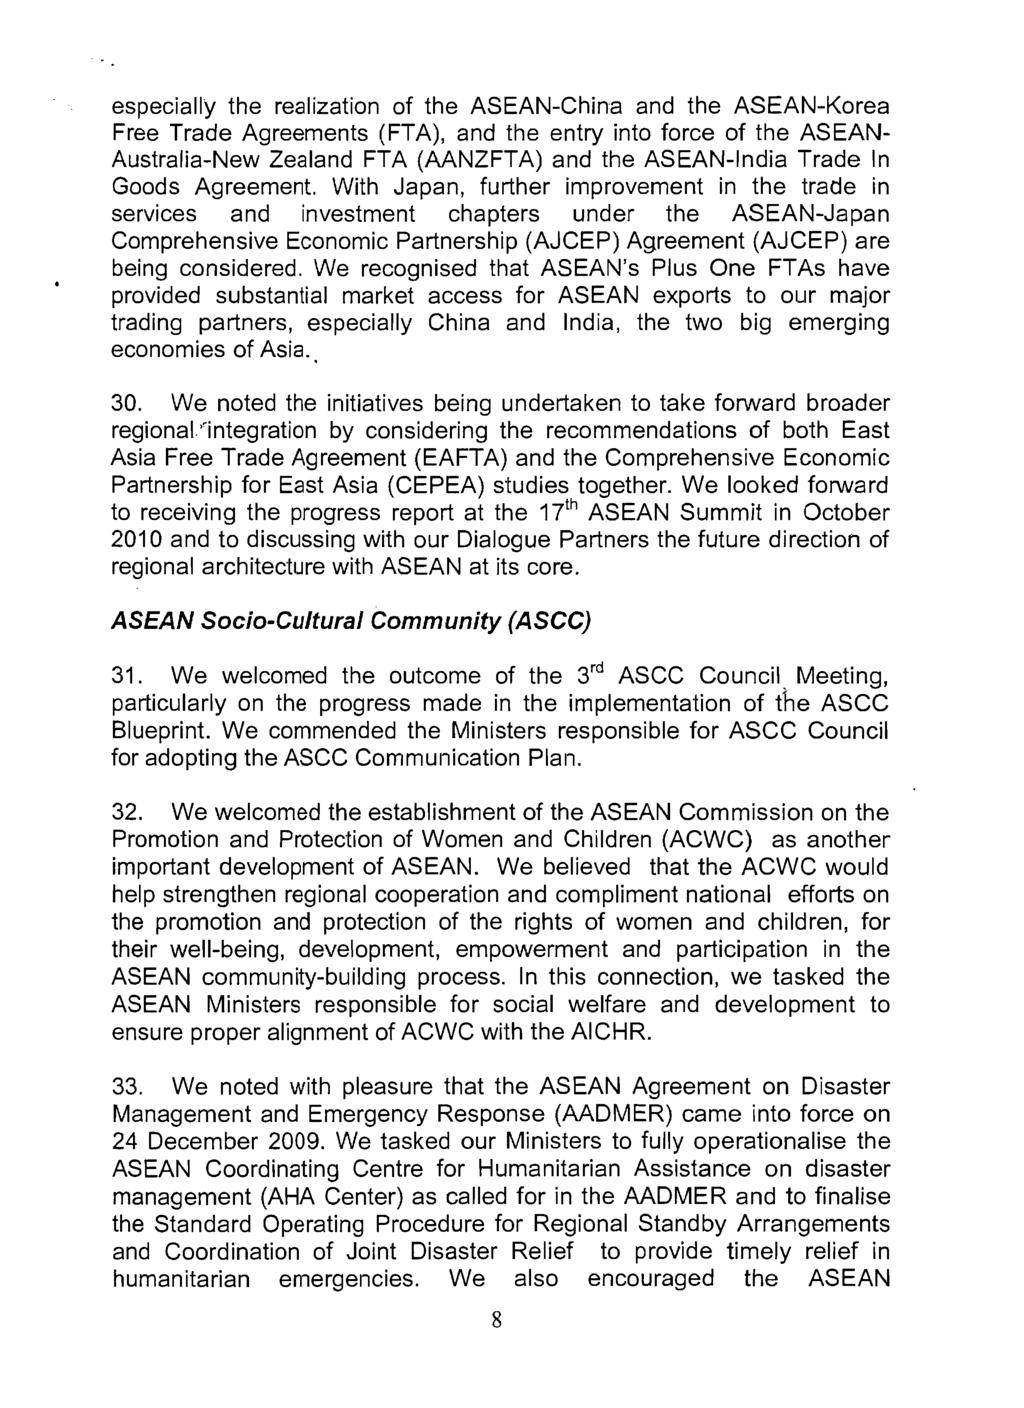 especially the ealization of the ASEAN-hina and the ASEAN-Koea Fee Tade Ageements (FTA), and the enty into foce of the ASEAN Austalia-New Zealand FTA (AANZFTA) and the ASEAN-India Tade In Goods